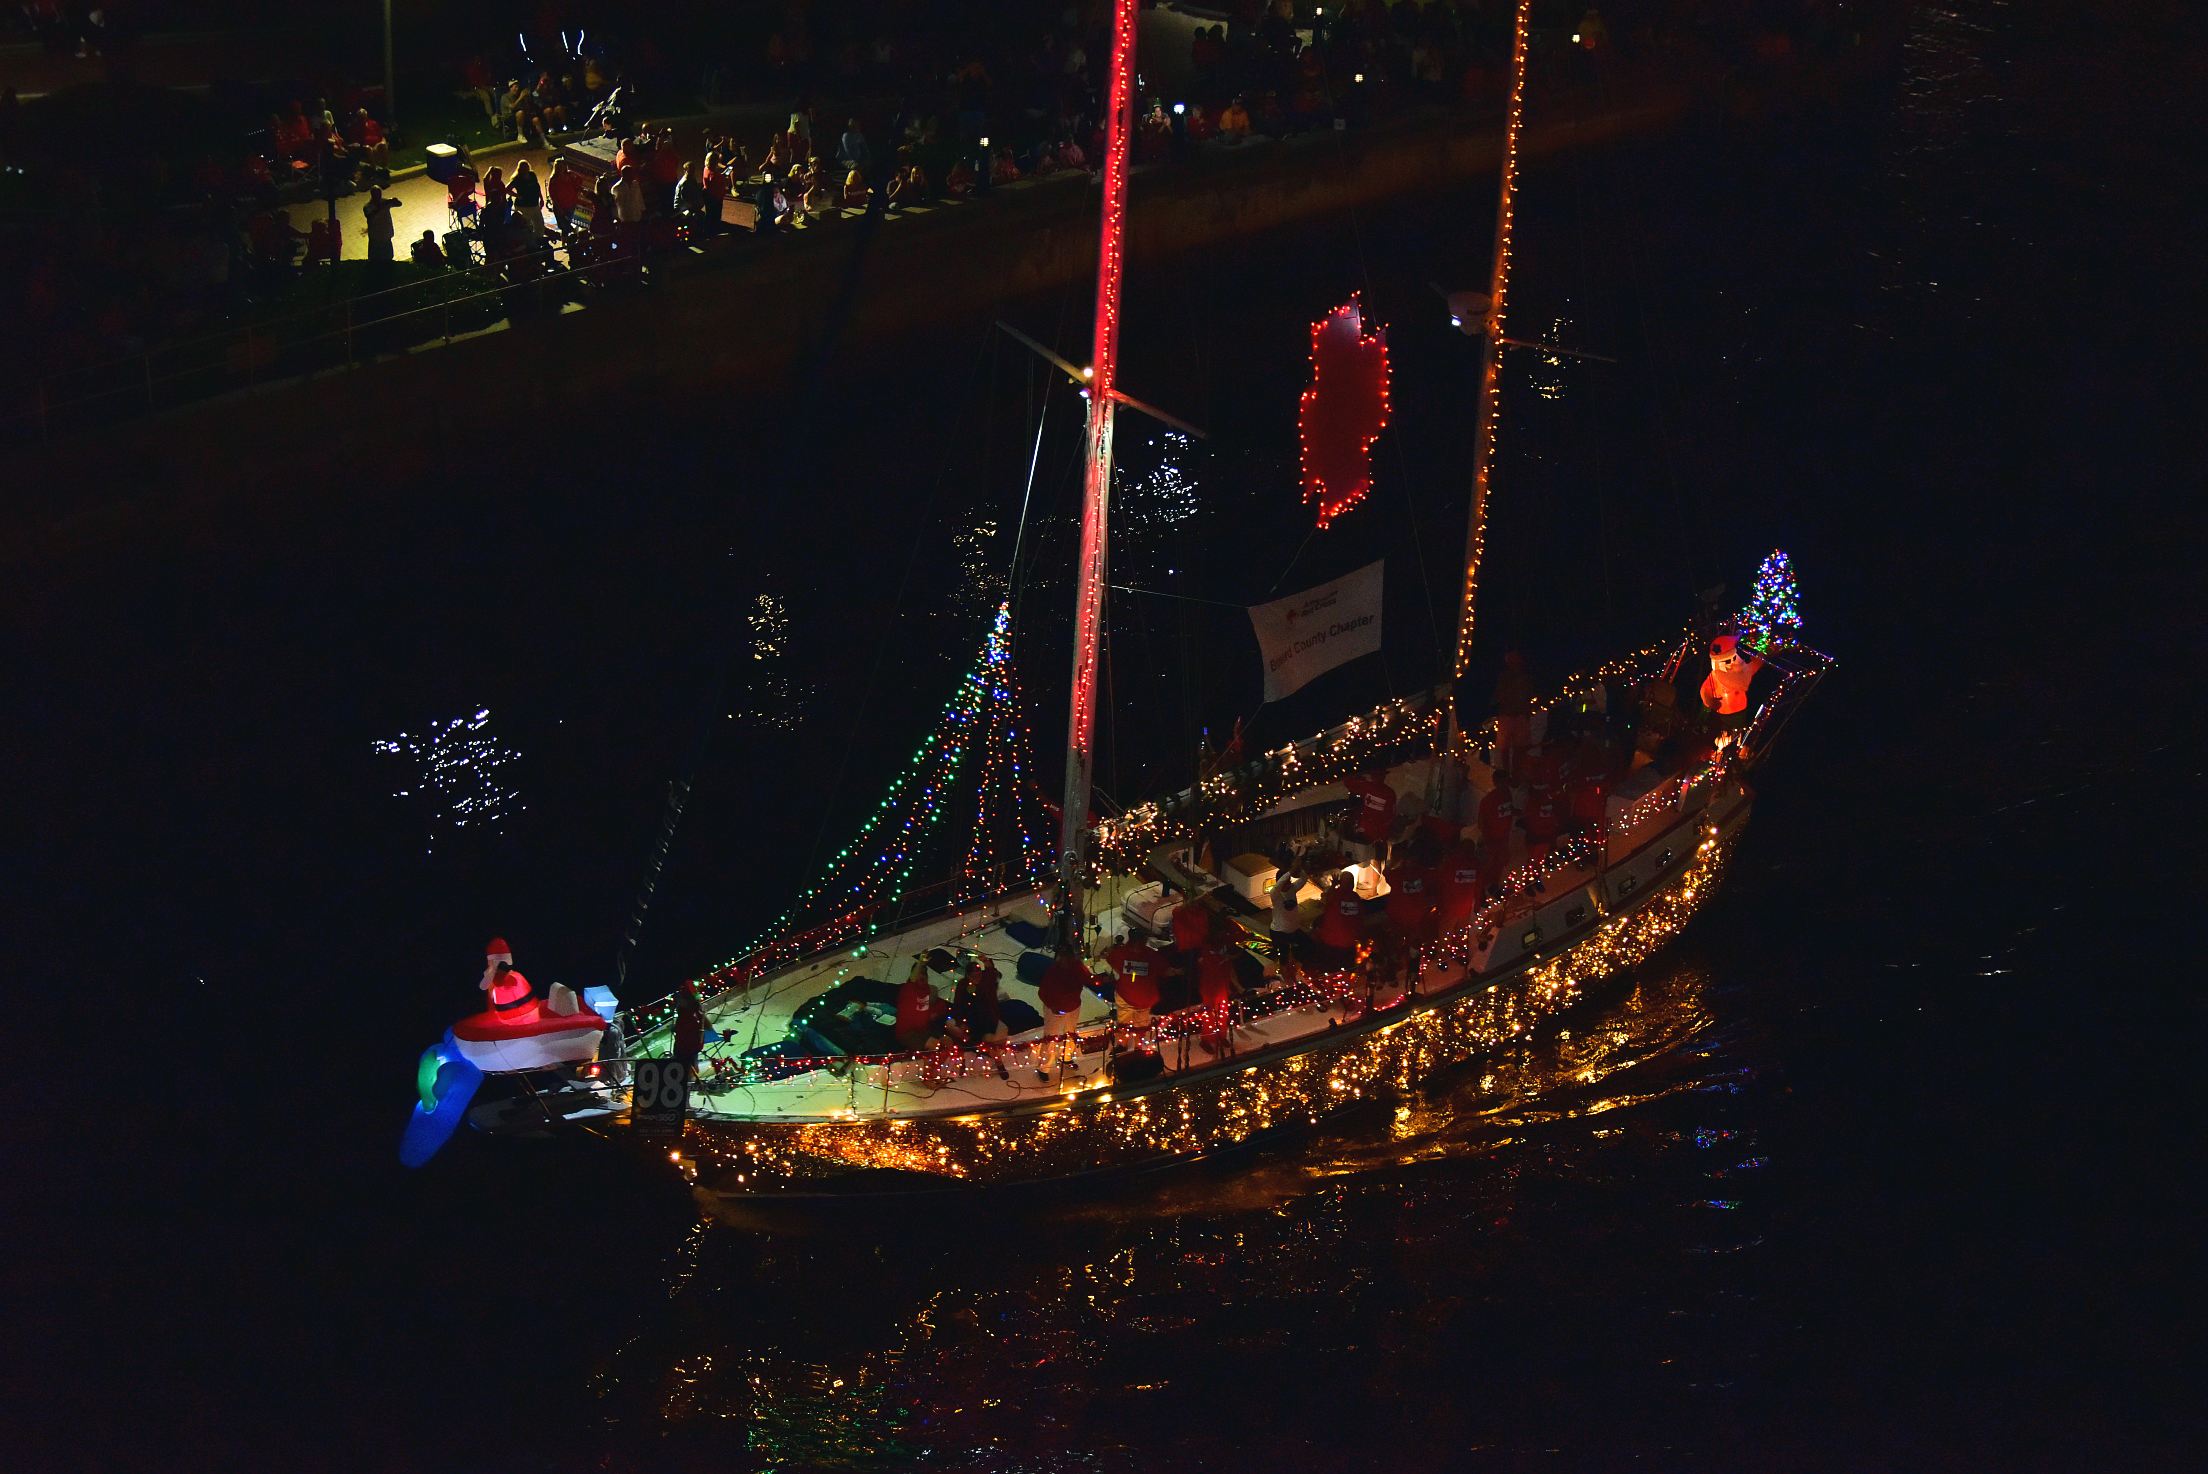 Red Cross on board Unexpected Pleasure, boat number 98 in the 2021 Winterfest Boat Parade